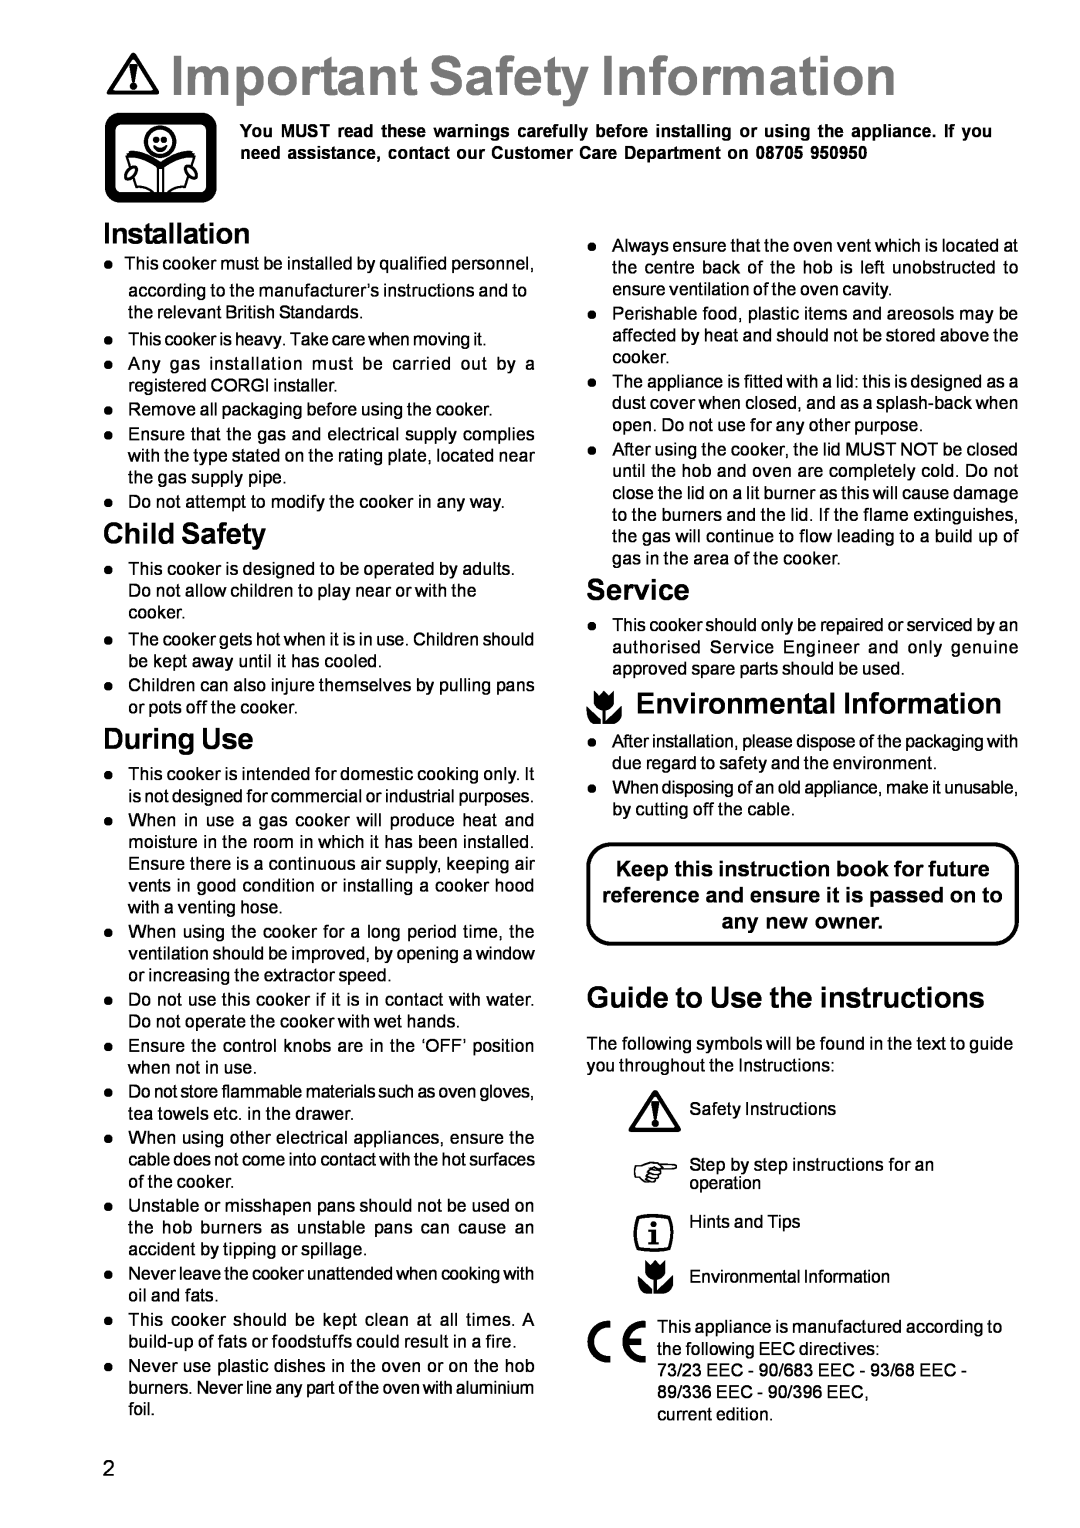 Parkinson Cowan CSIM 509 manual Important Safety Information, Installation, Child Safety, During Use, Service 